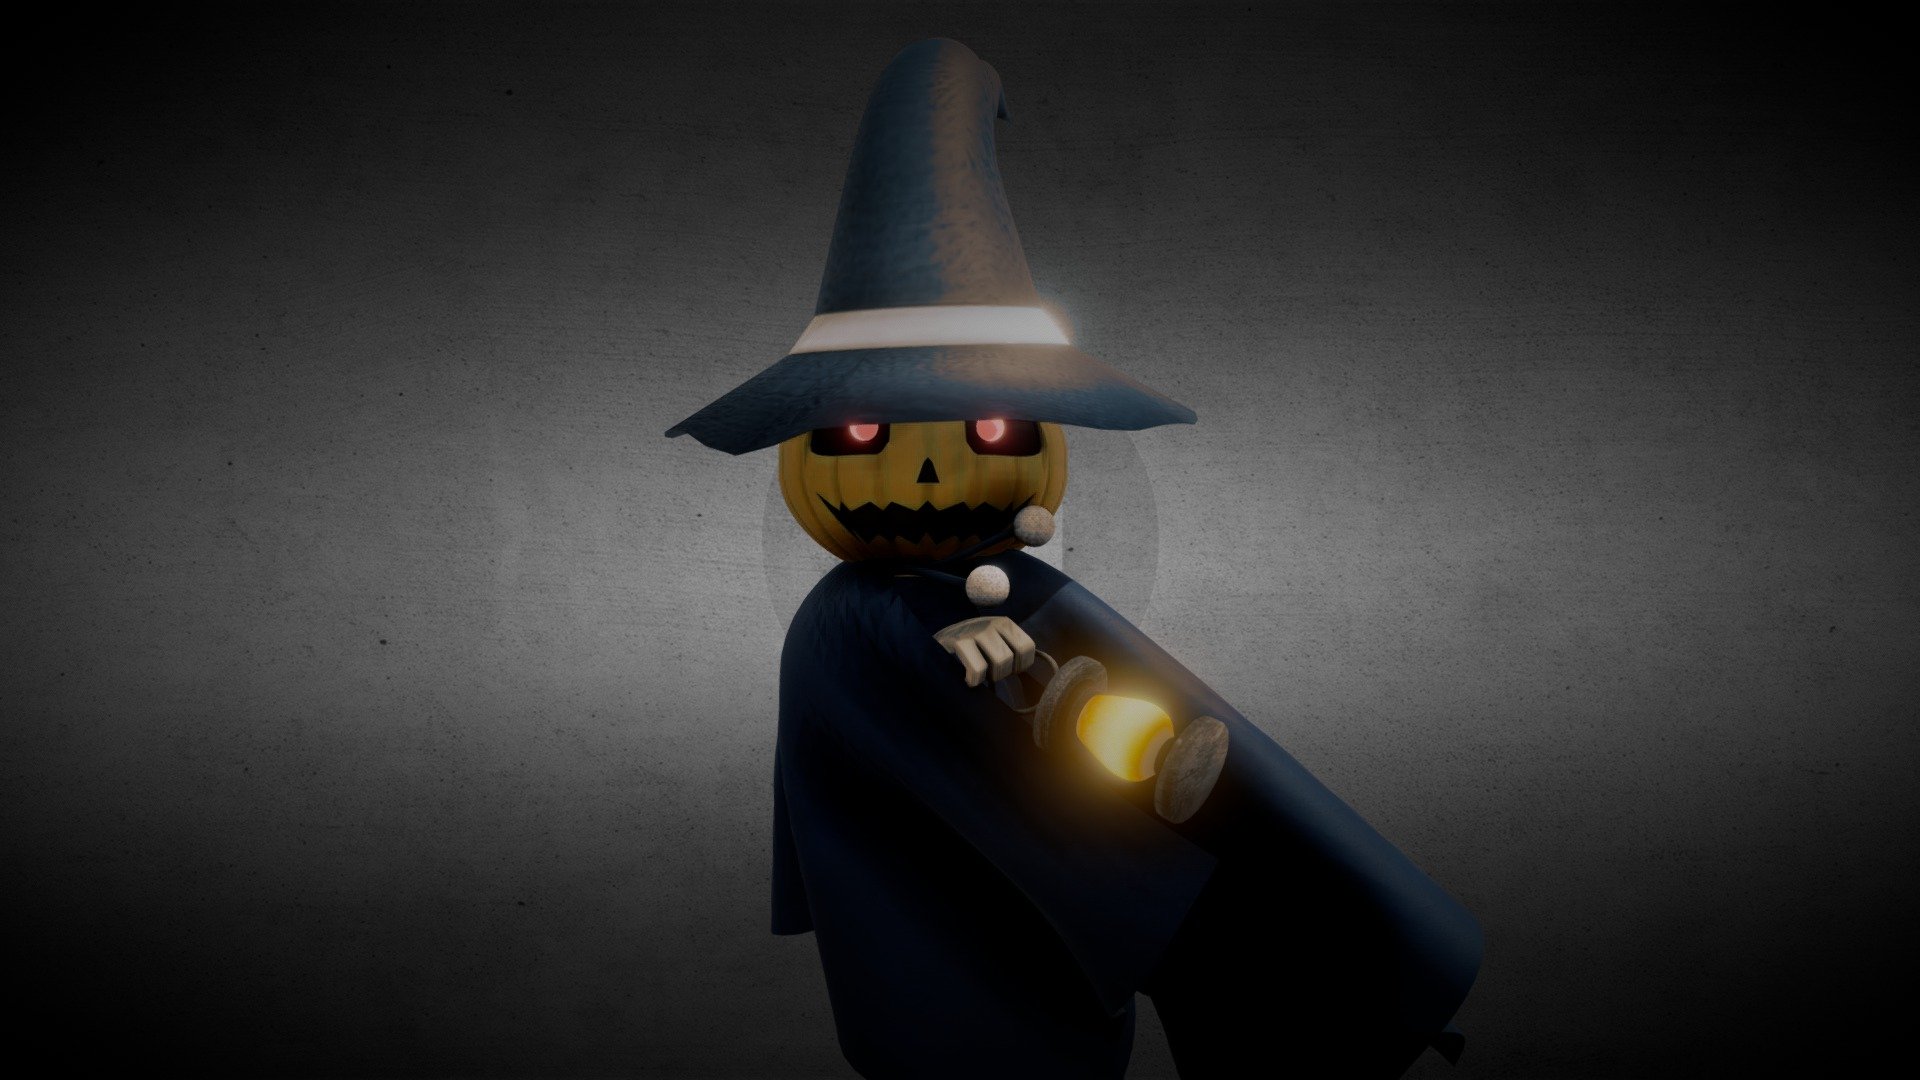 &ldquo;In Japan, Pyro Jack is named after the fabled figure Jack-O'-Lantern. According to the earliest accounts of the tale, &ldquo;Stingy Jack